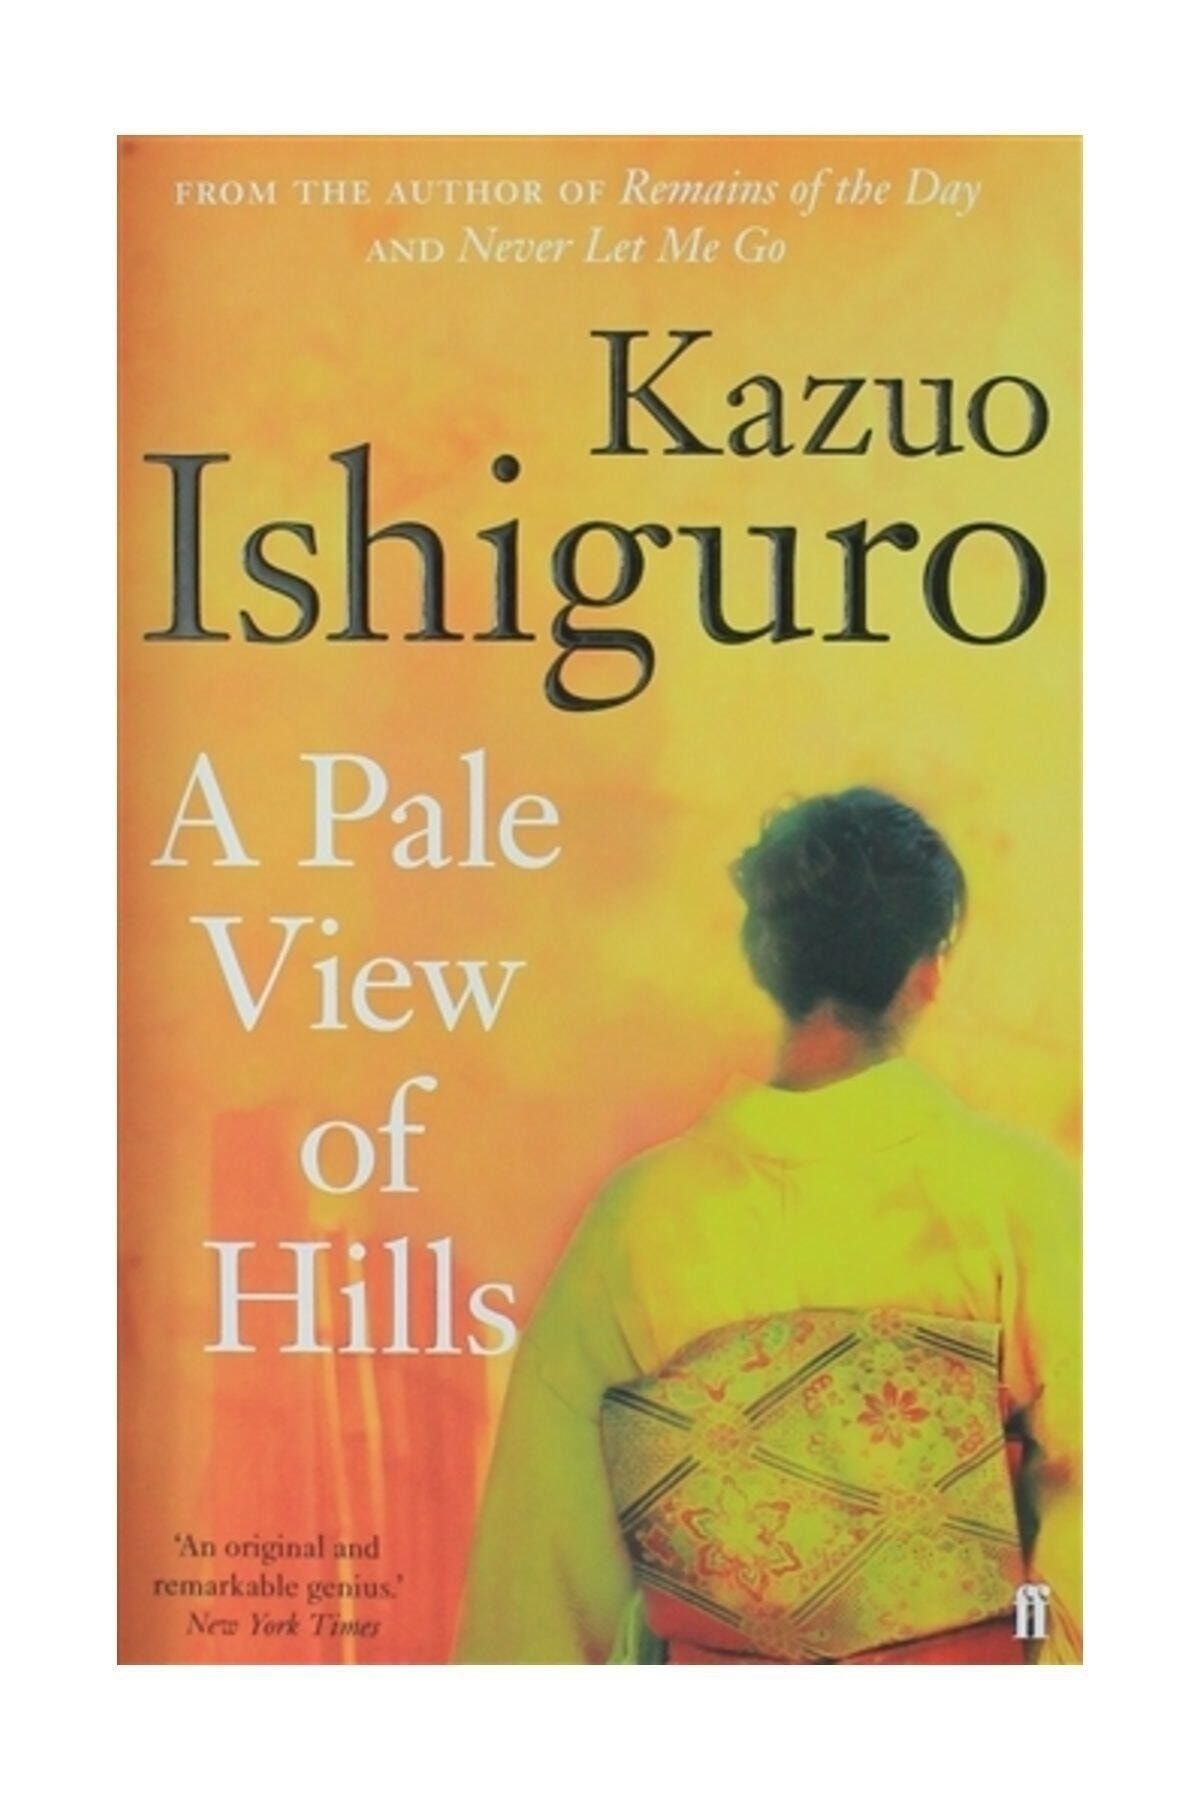 faber And Faber A Pale View of Hills - Kazuo Ishiguro